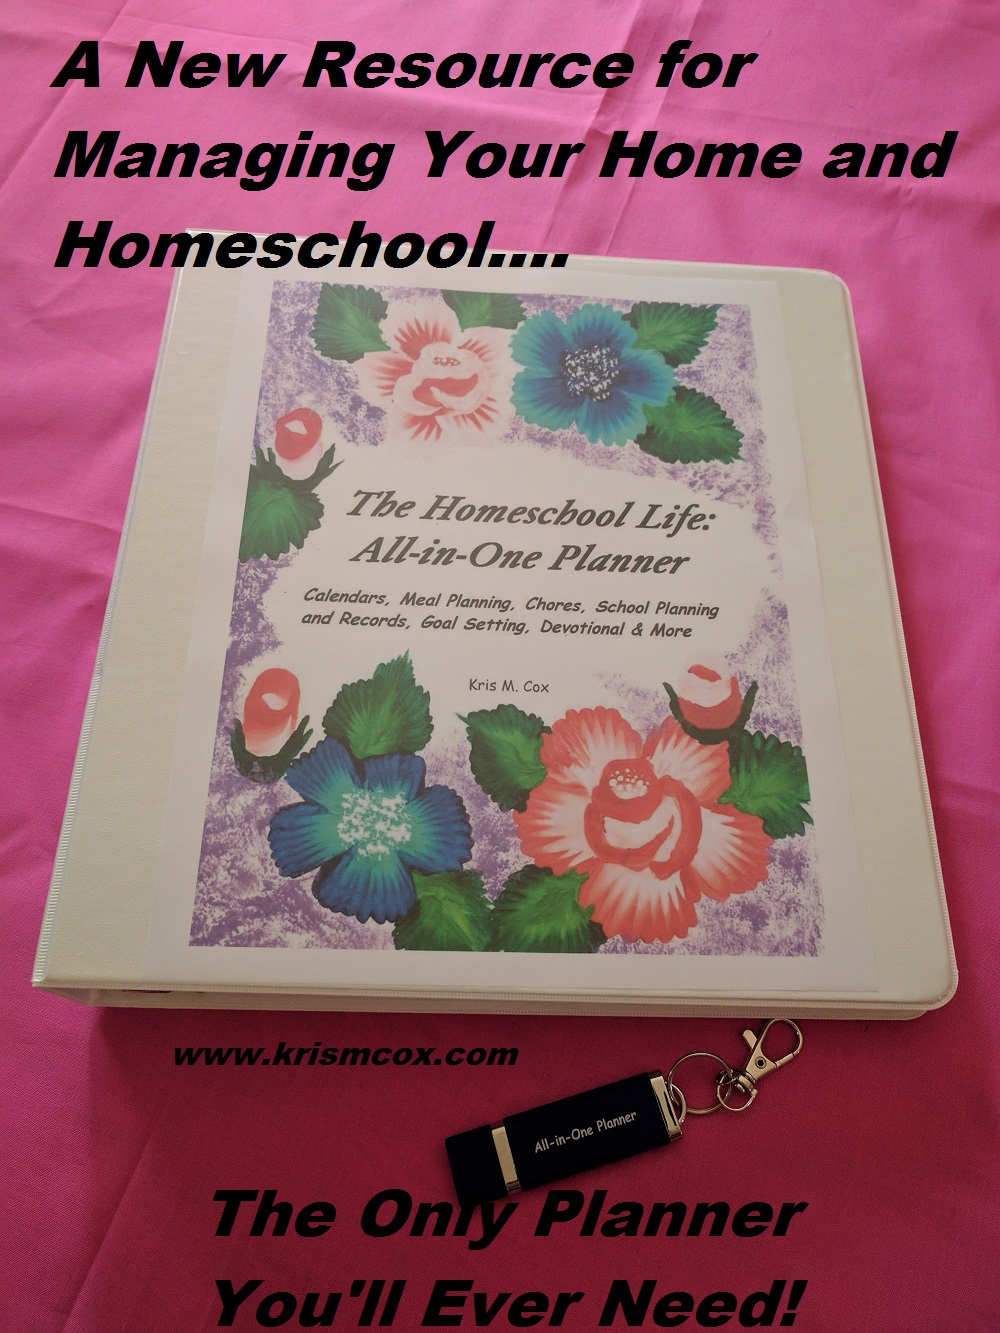 A New Way to Manage Your Home and Homeschool…